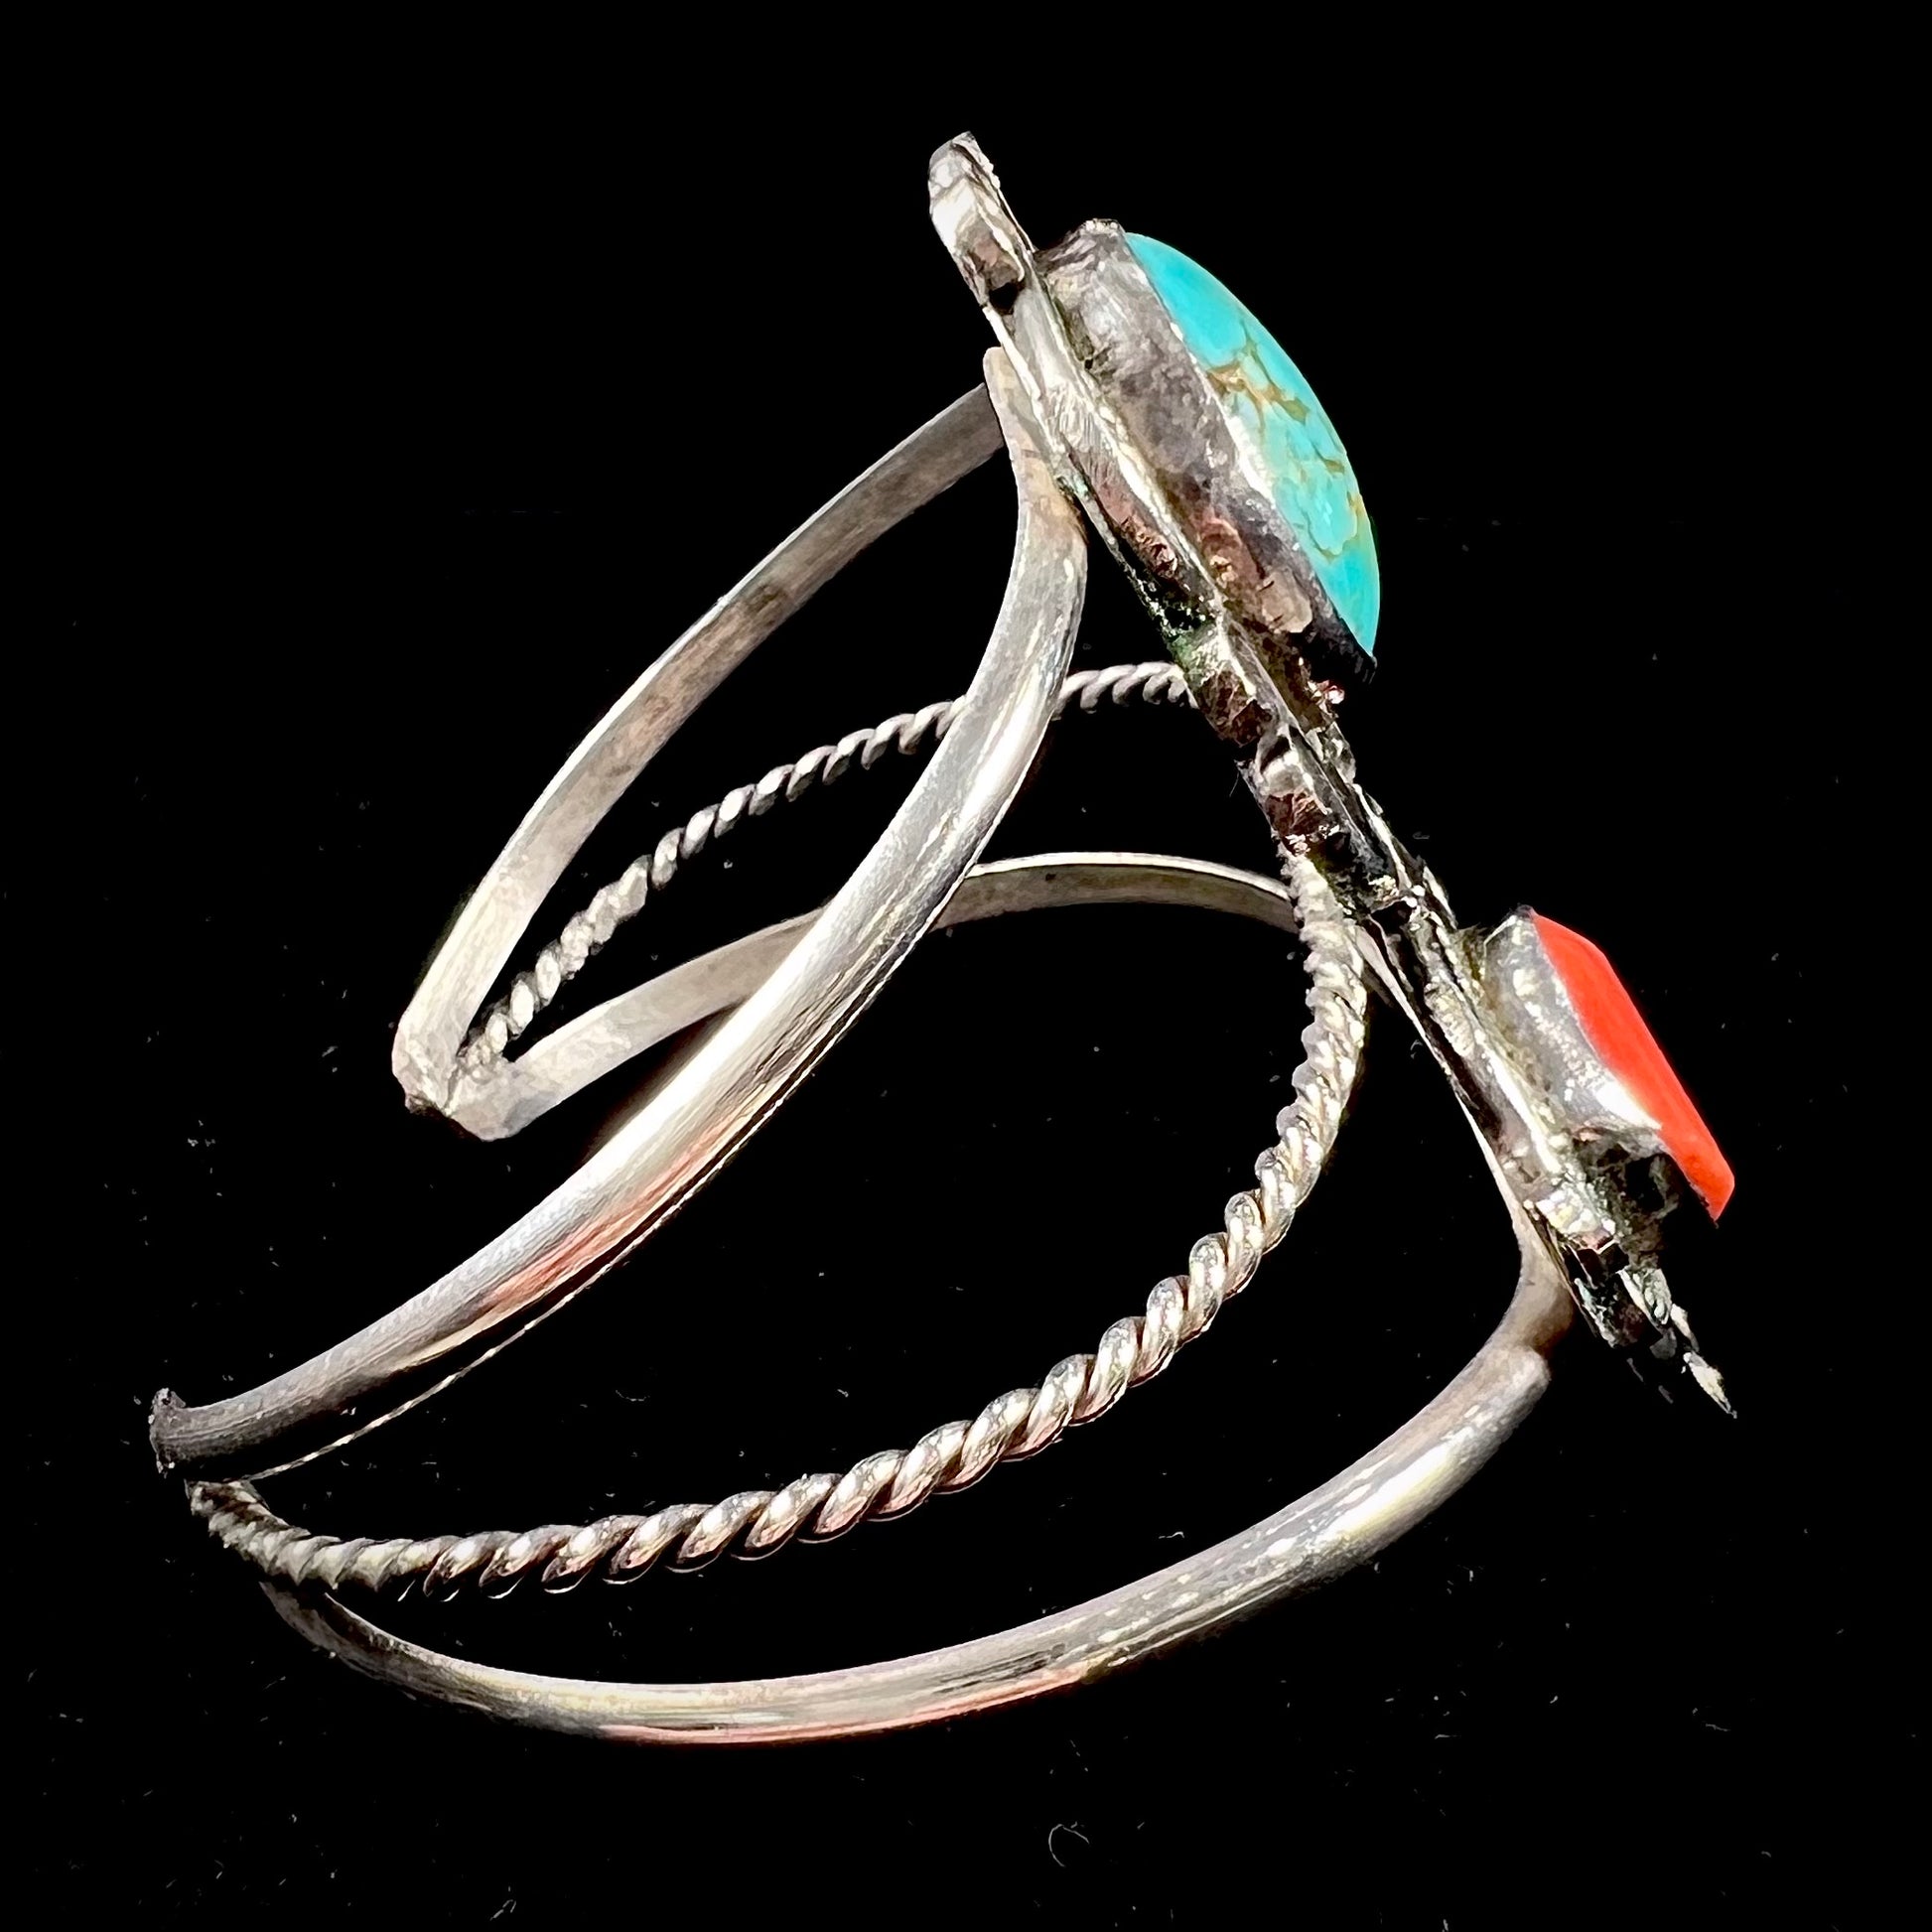 A ladies' Navajo cuff bracelet set with Royston turquoise and Mediterranean coral stones.